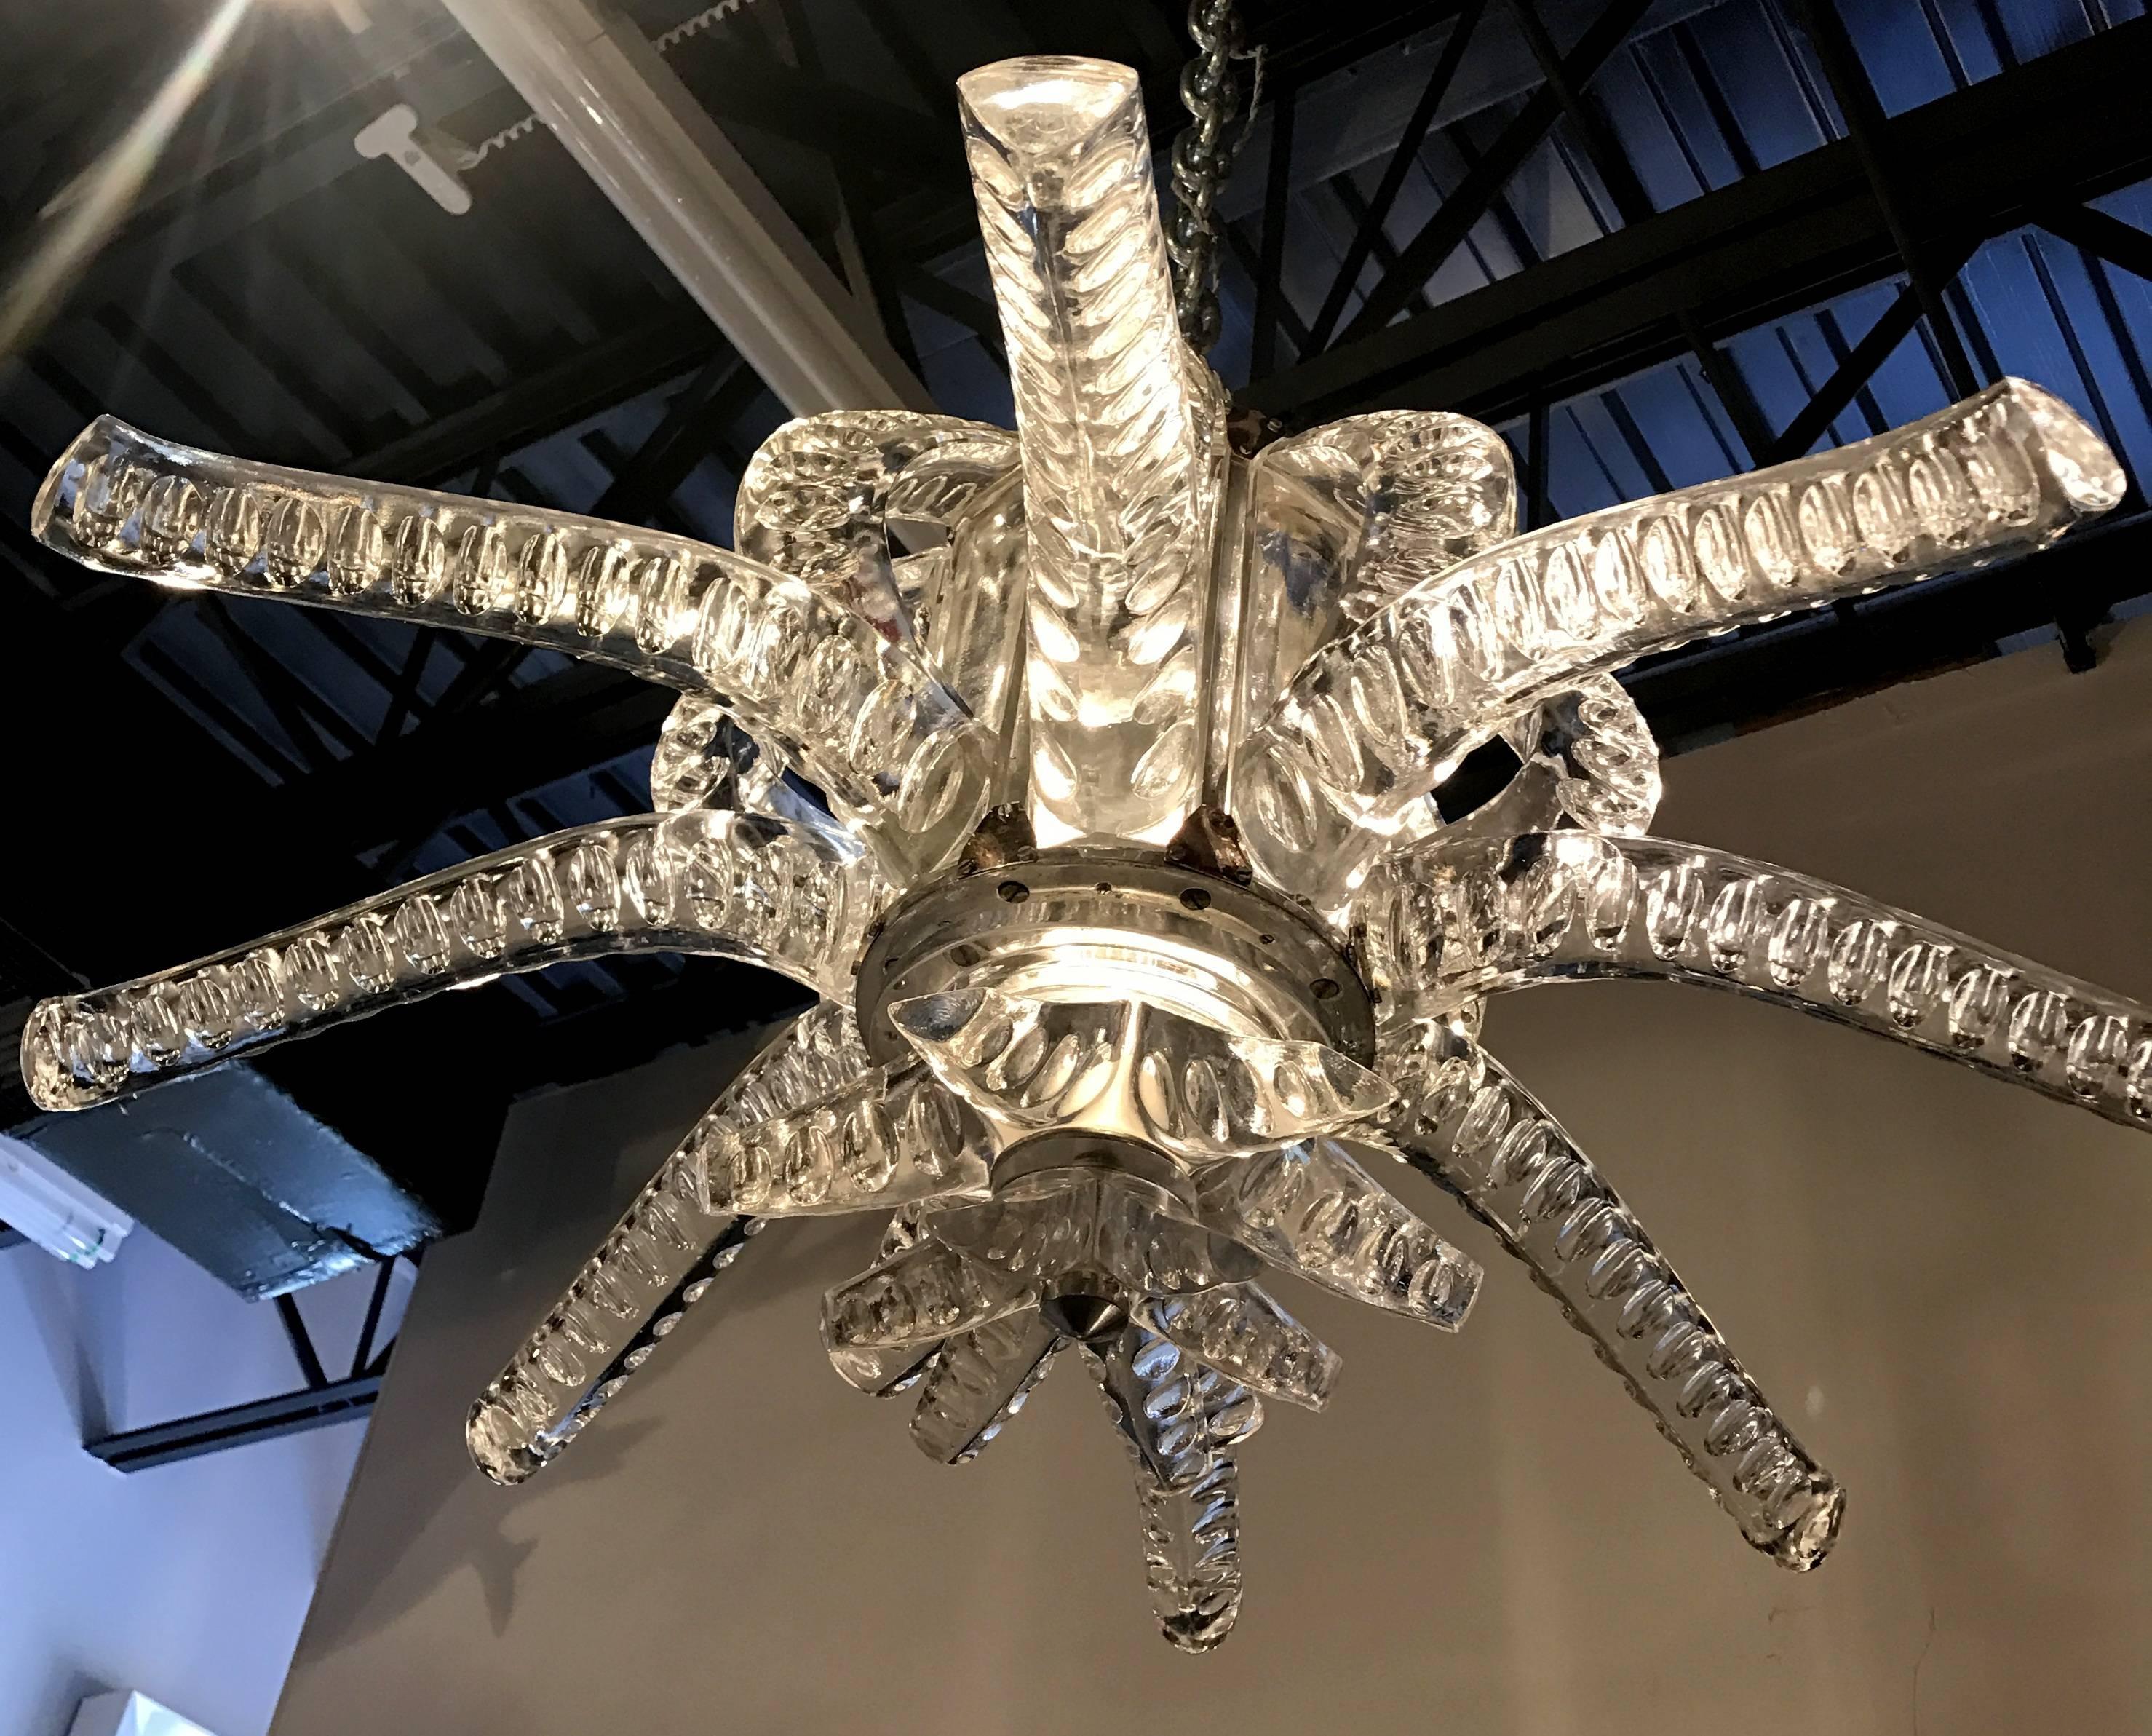 Beautiful lighting-sculpture made of crystal-glass, Marc, son of the famous glass-maker René Lalique took over the family enterprise after his father’s death. As a technician he modernized the manufacture and was well-known for his crystal-objects.